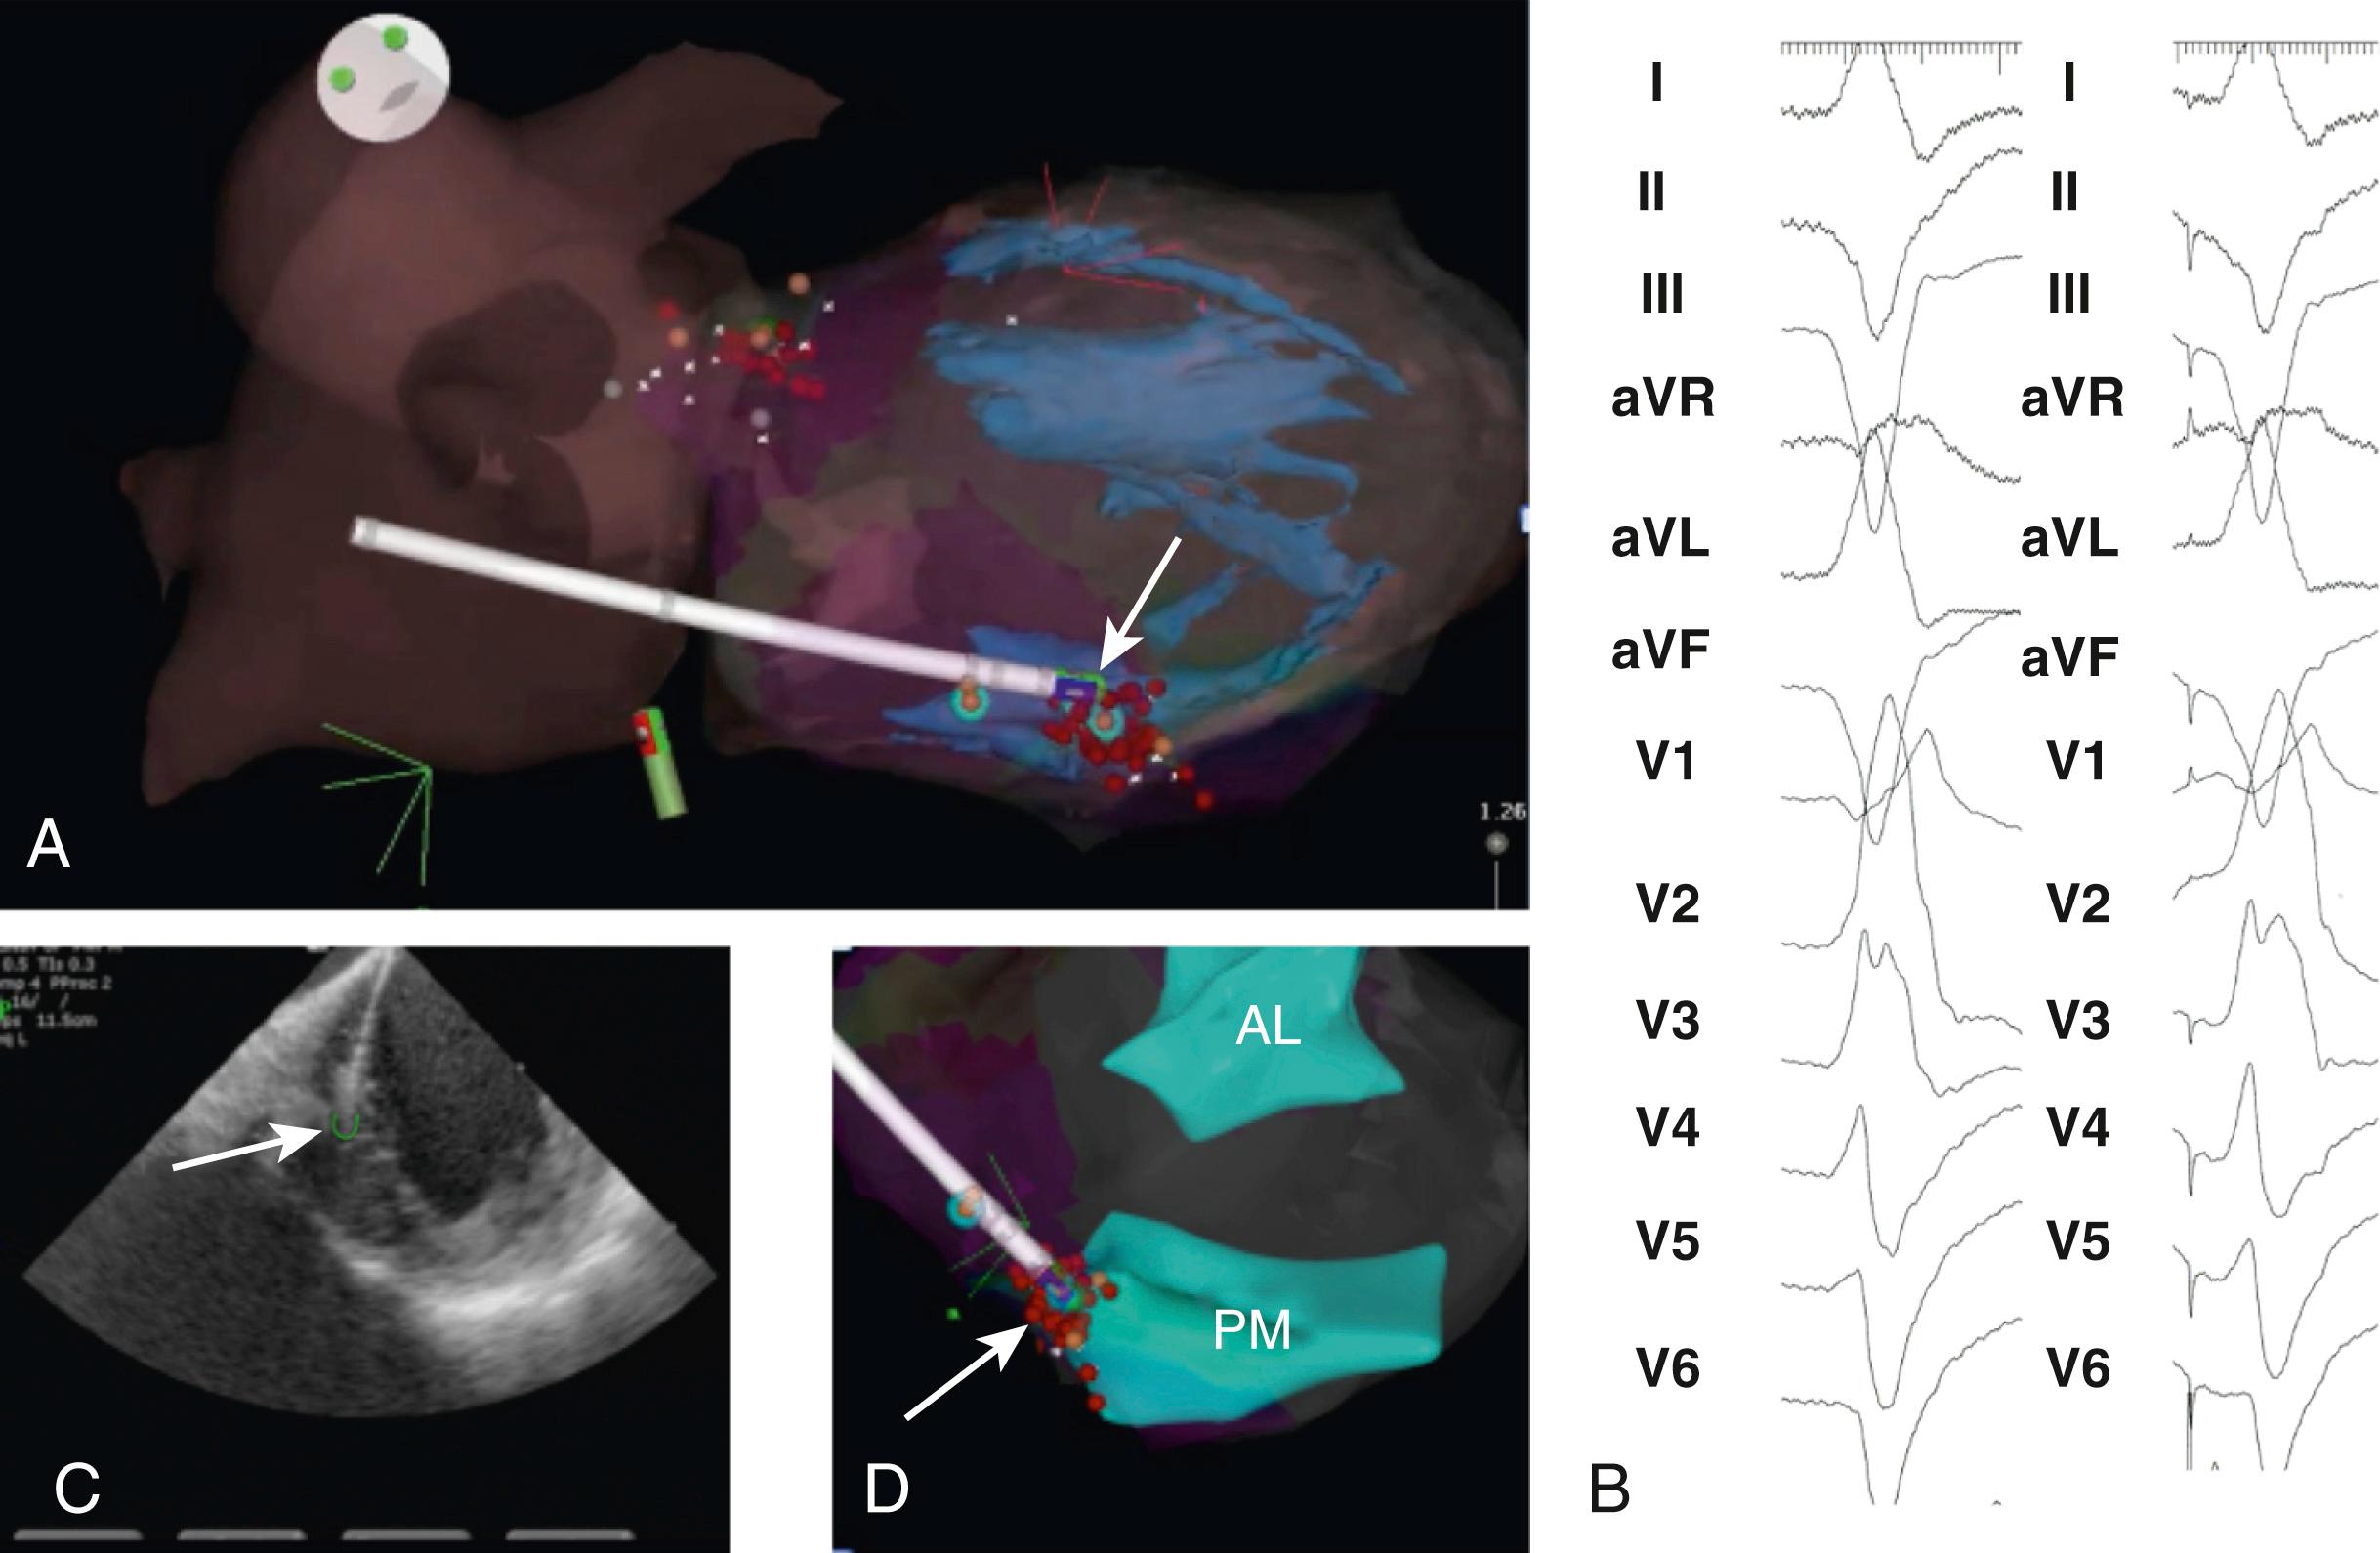 Fig. 80.2, Imaging and catheter locations in a patient with bileaflet mitral valve prolapse with recurrent VF.